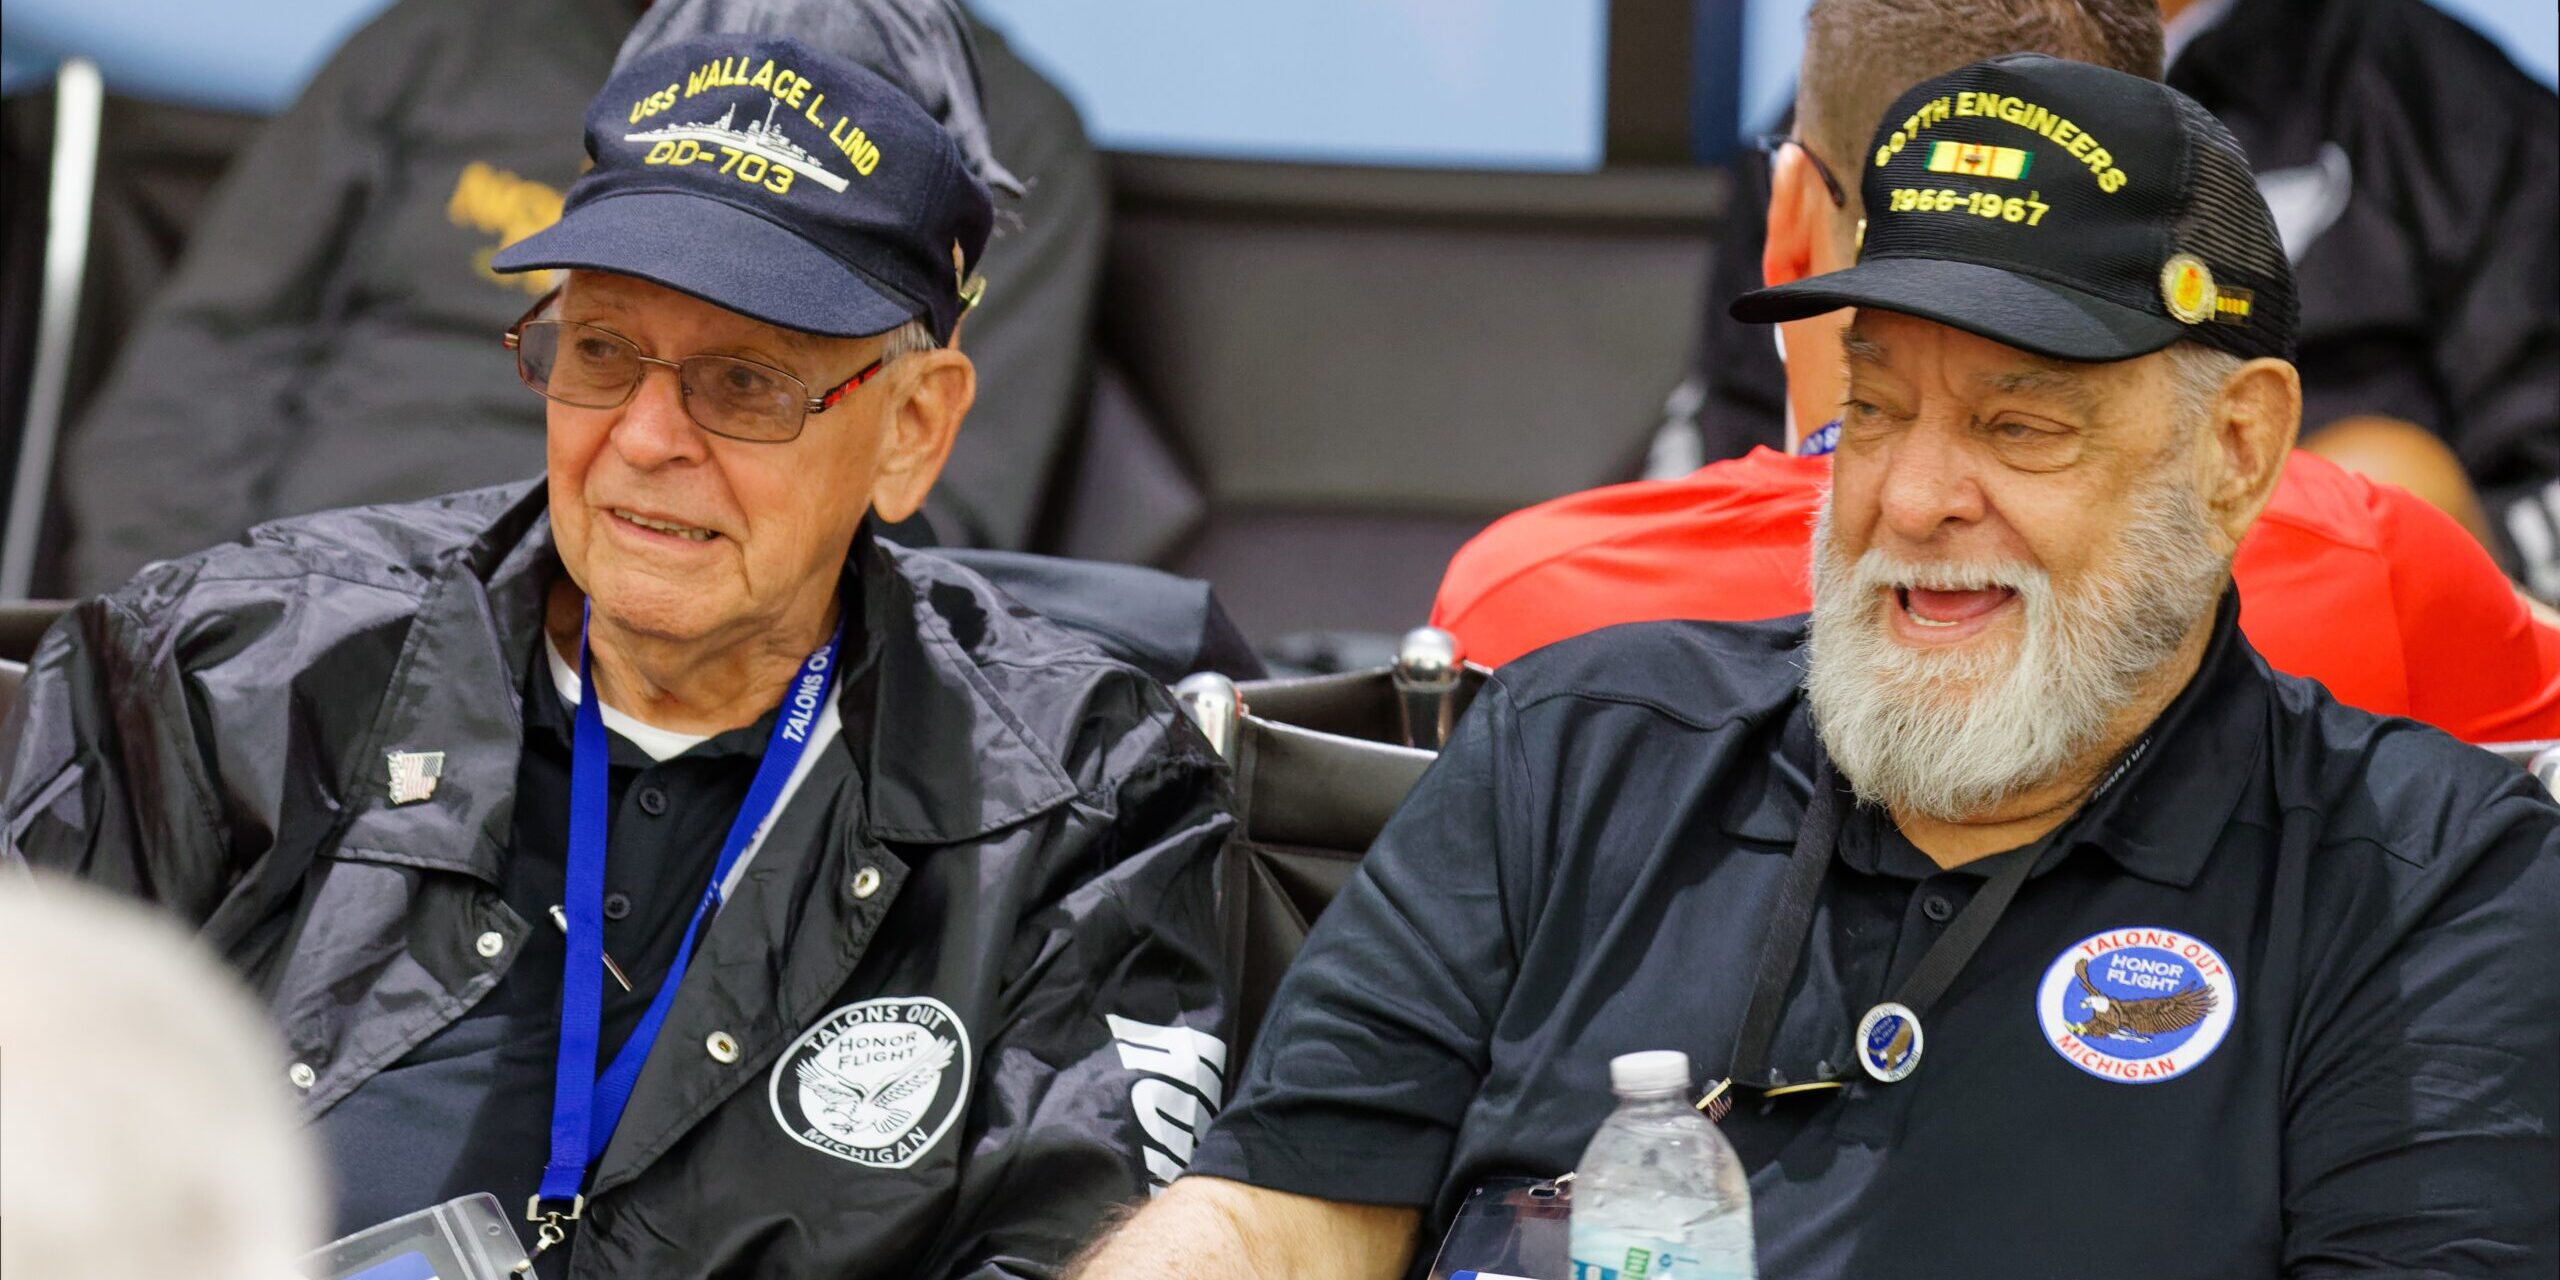 Two military veterans sit next to each other in an airport.